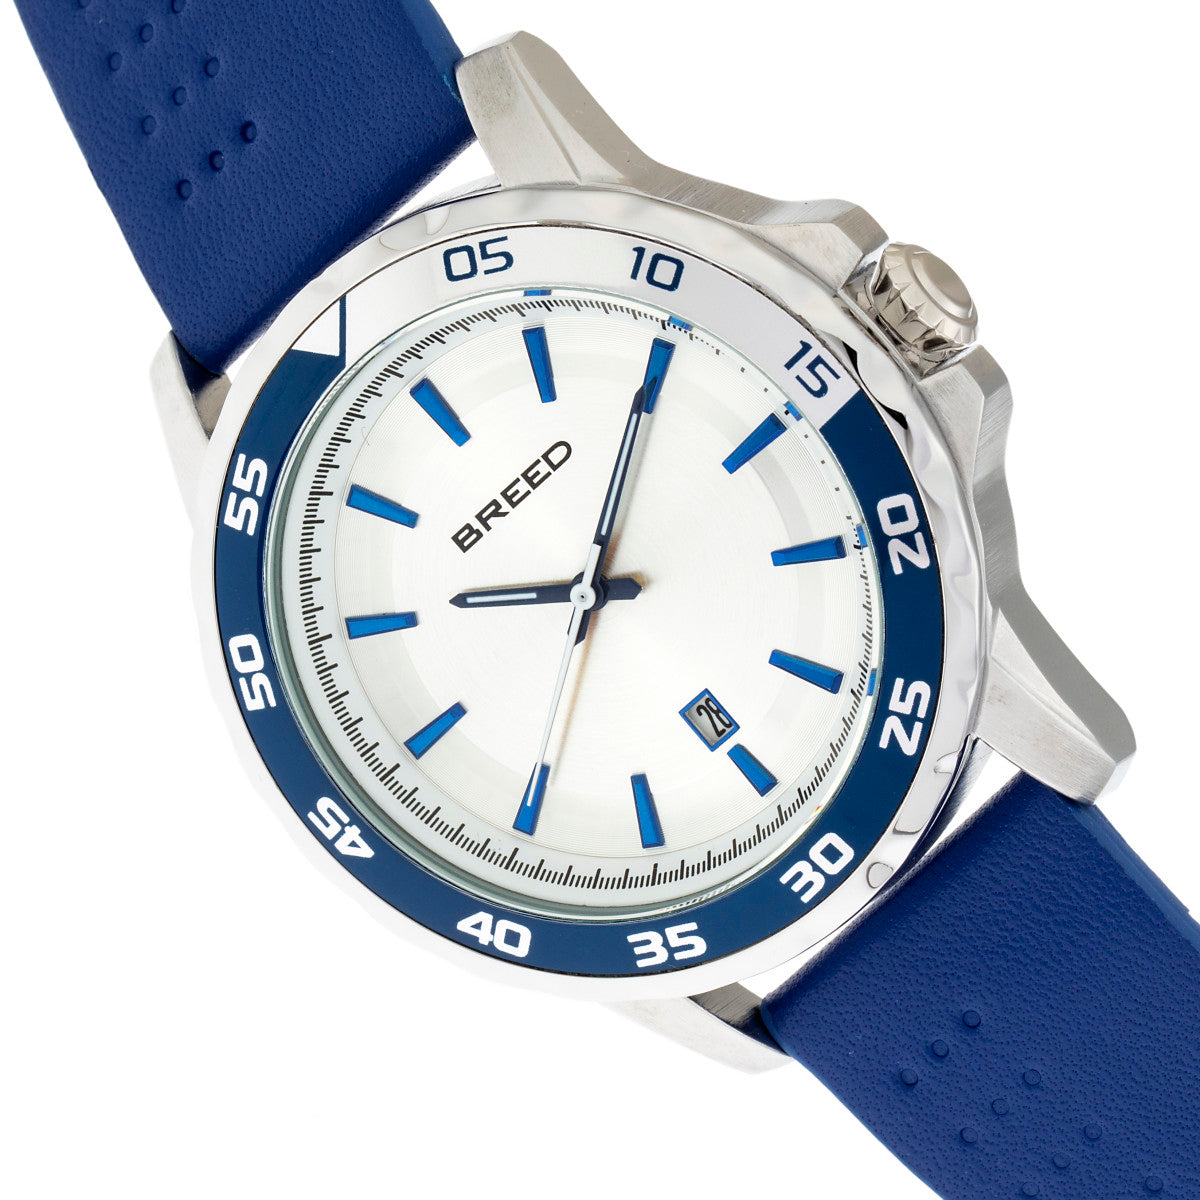 Breed Revolution Leather-Band Watch w/Date - Blue - BRD8301